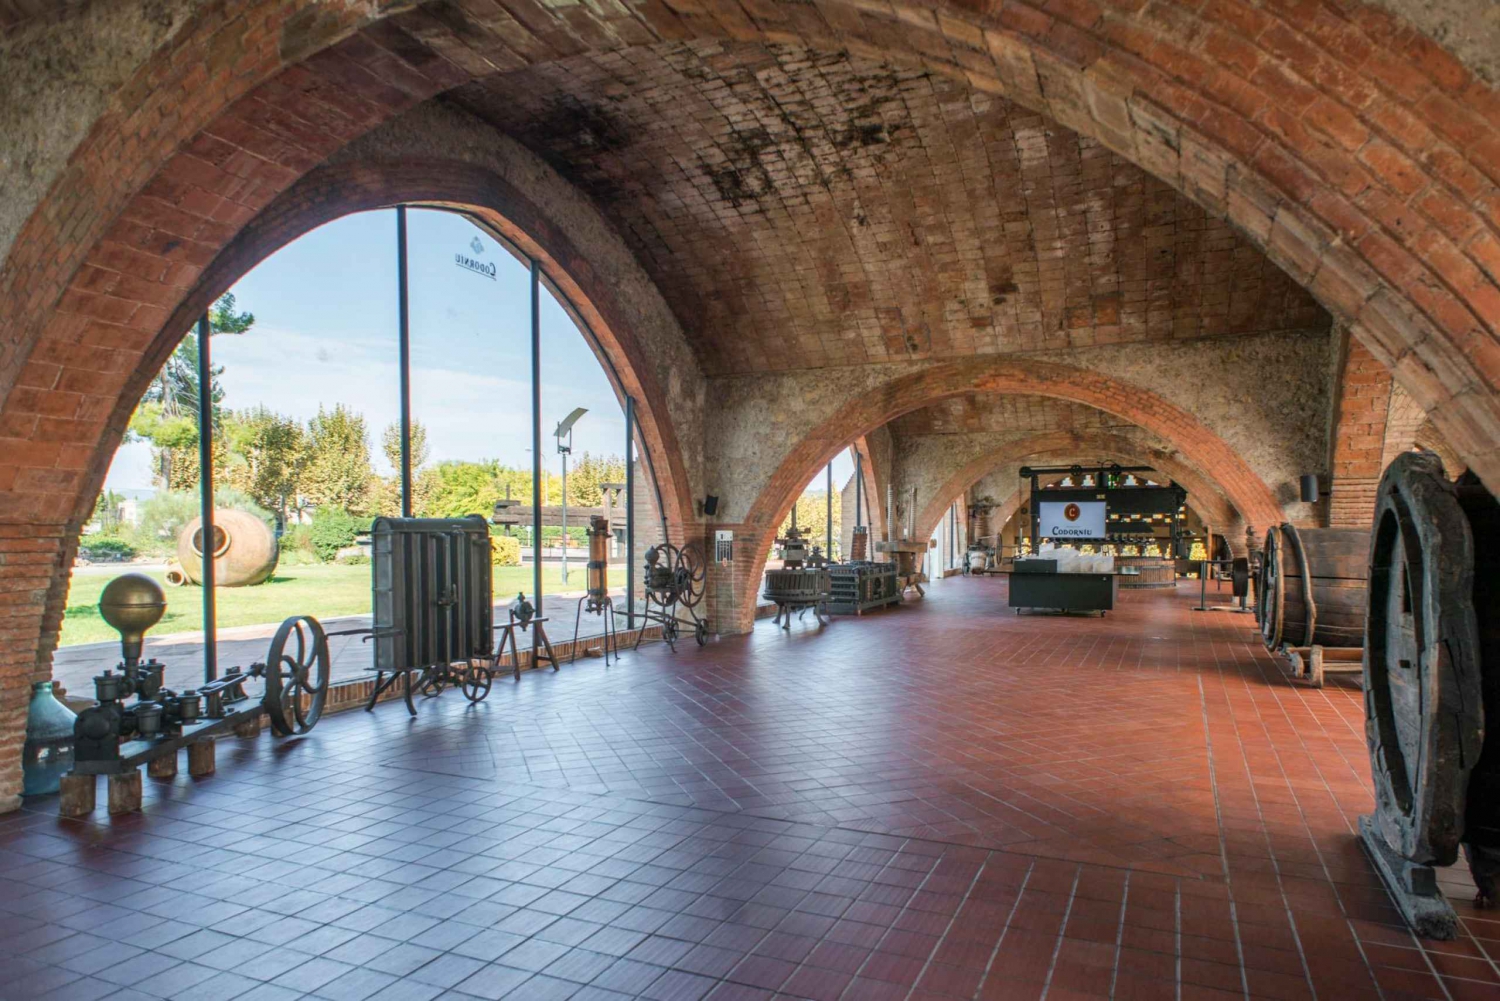 Barcelona: Caves Codorniu Winery Tour Based on Anna's Life